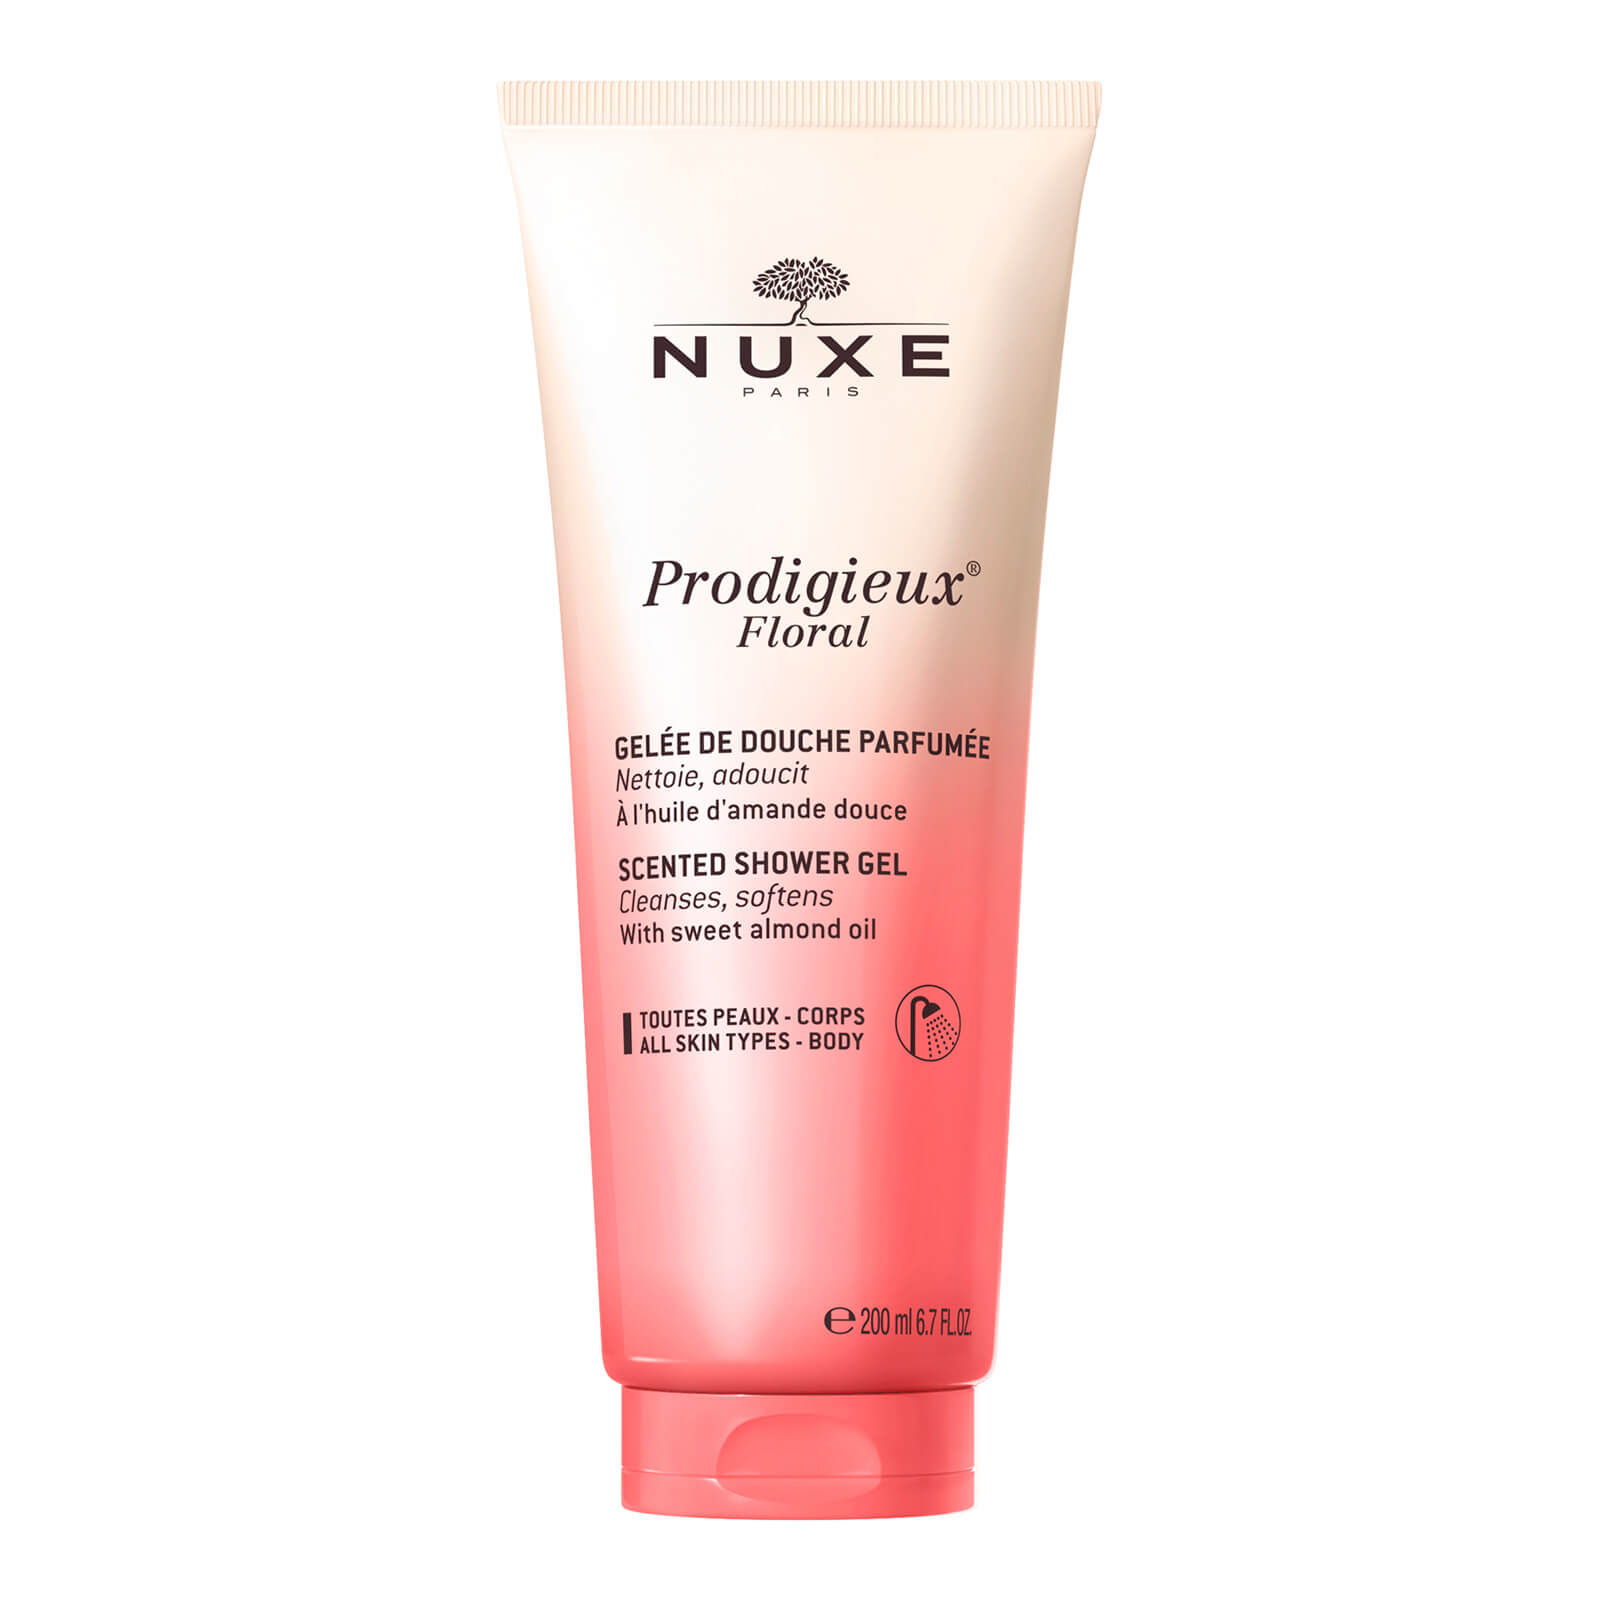 Nuxe Prodigieux Floral Sweet Almond Oil Scented Shower Gel von NUXE